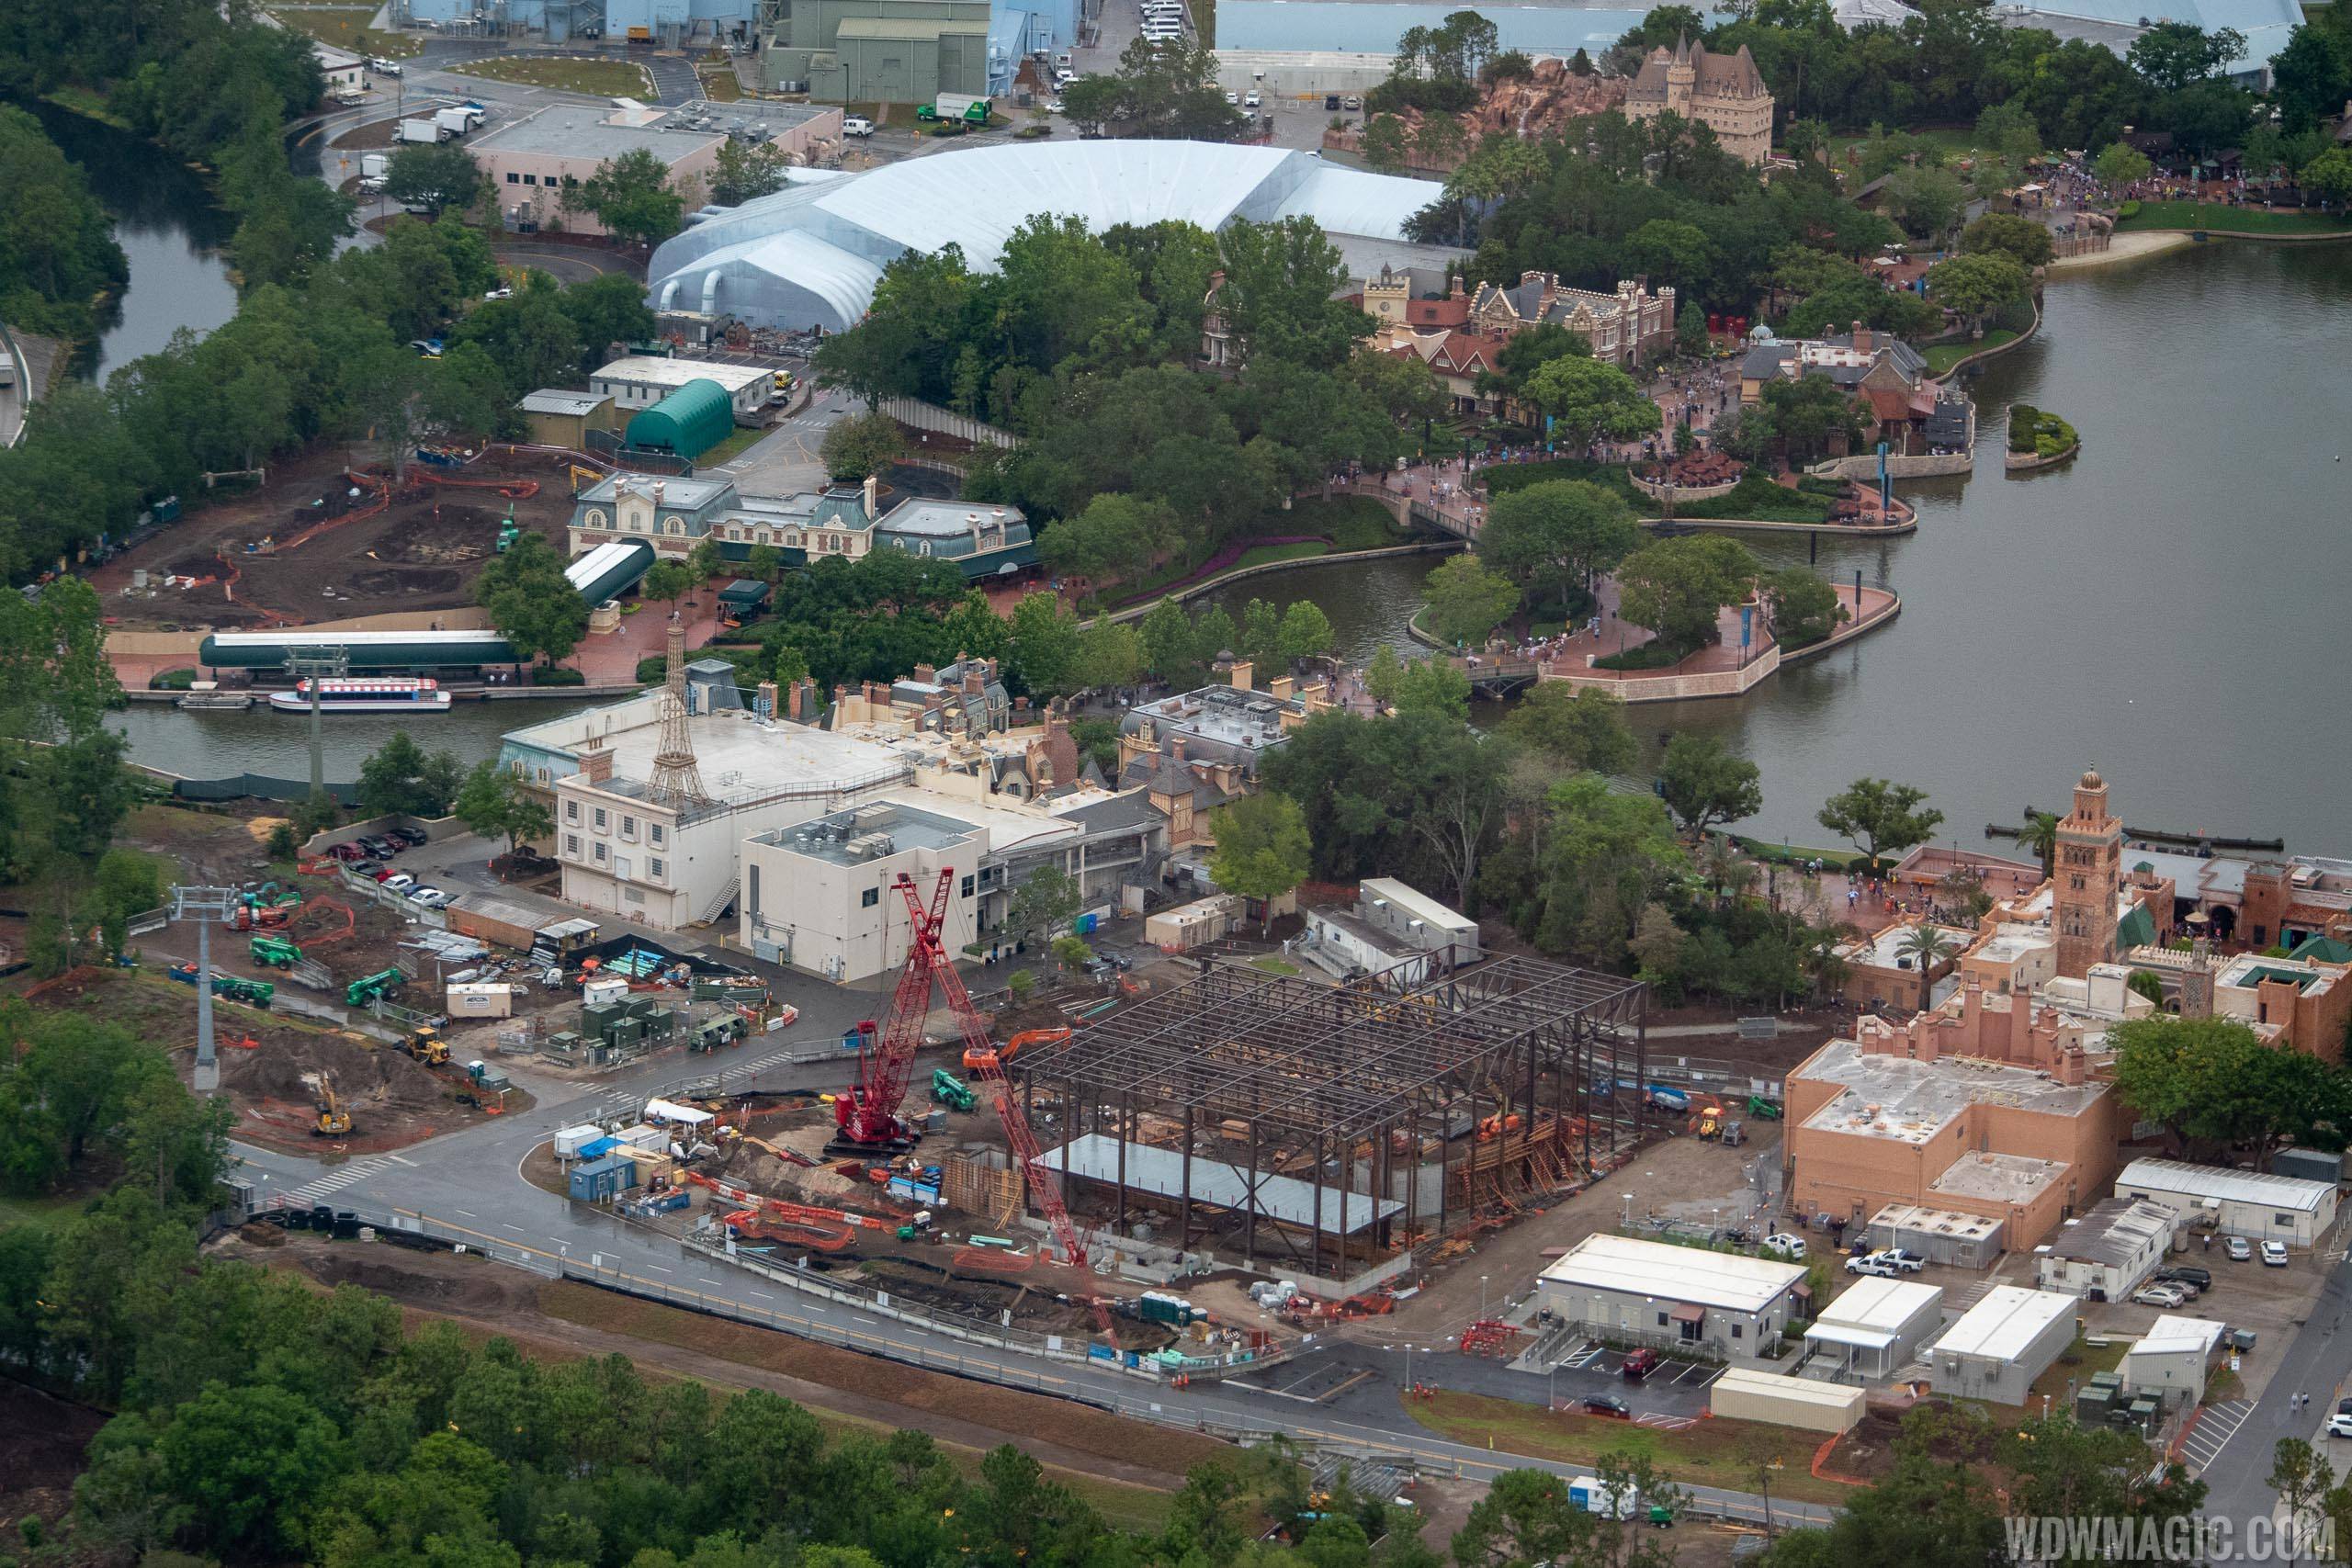 PHOTOS - Ratatouille construction pictures from the air